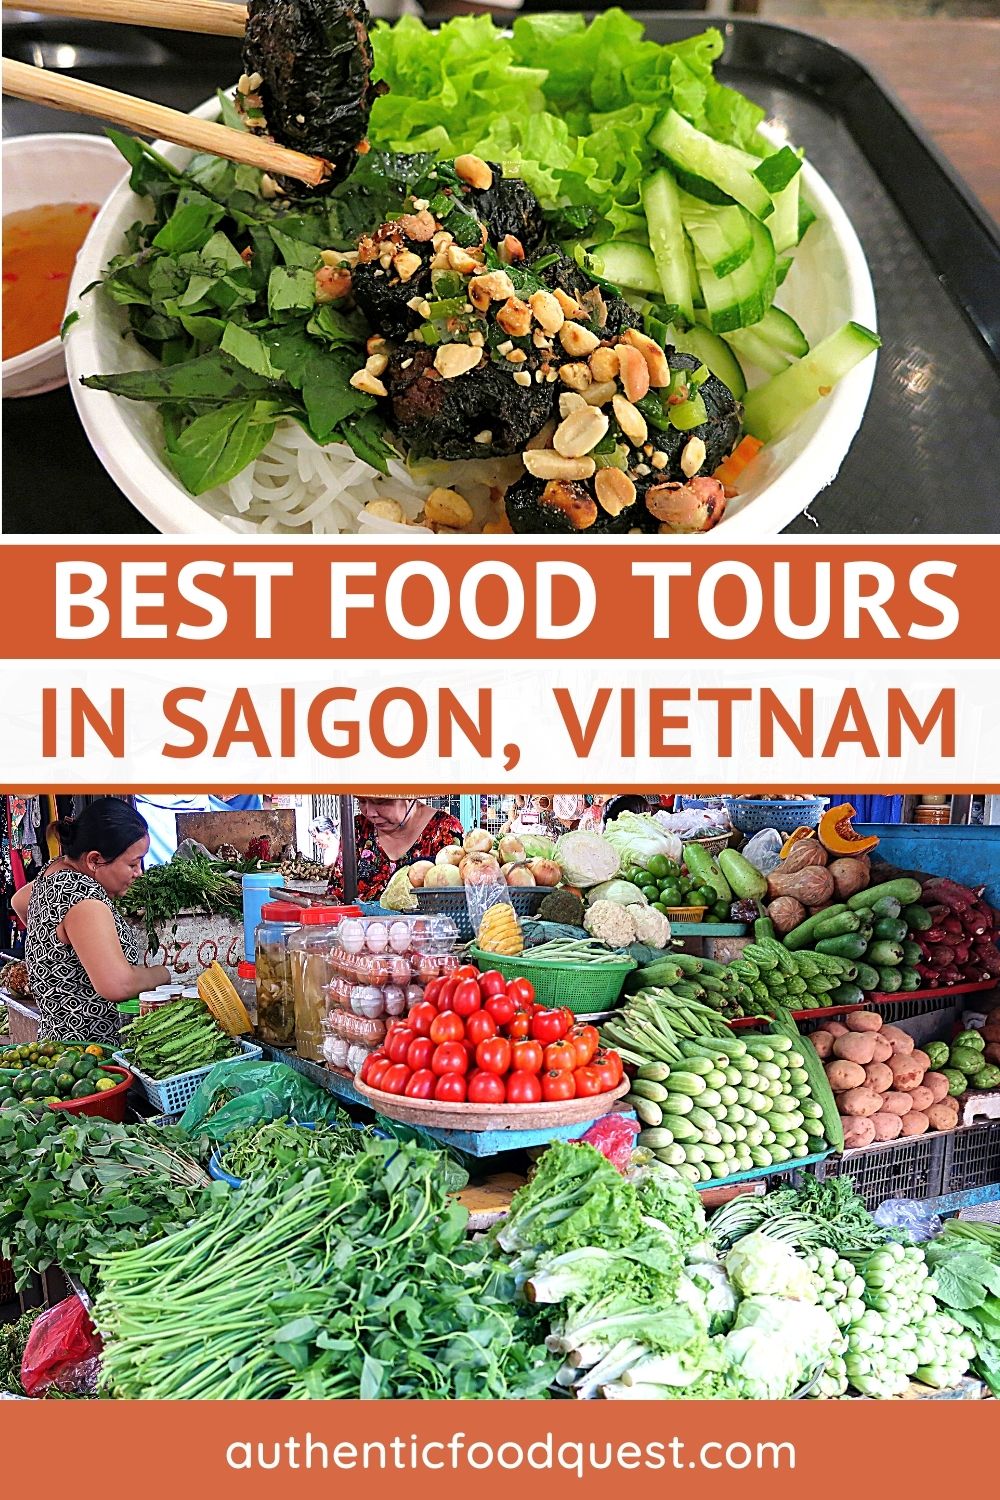 The Best 7 Food Tours In Saigon For Authentic Vietnamese Culinary ...